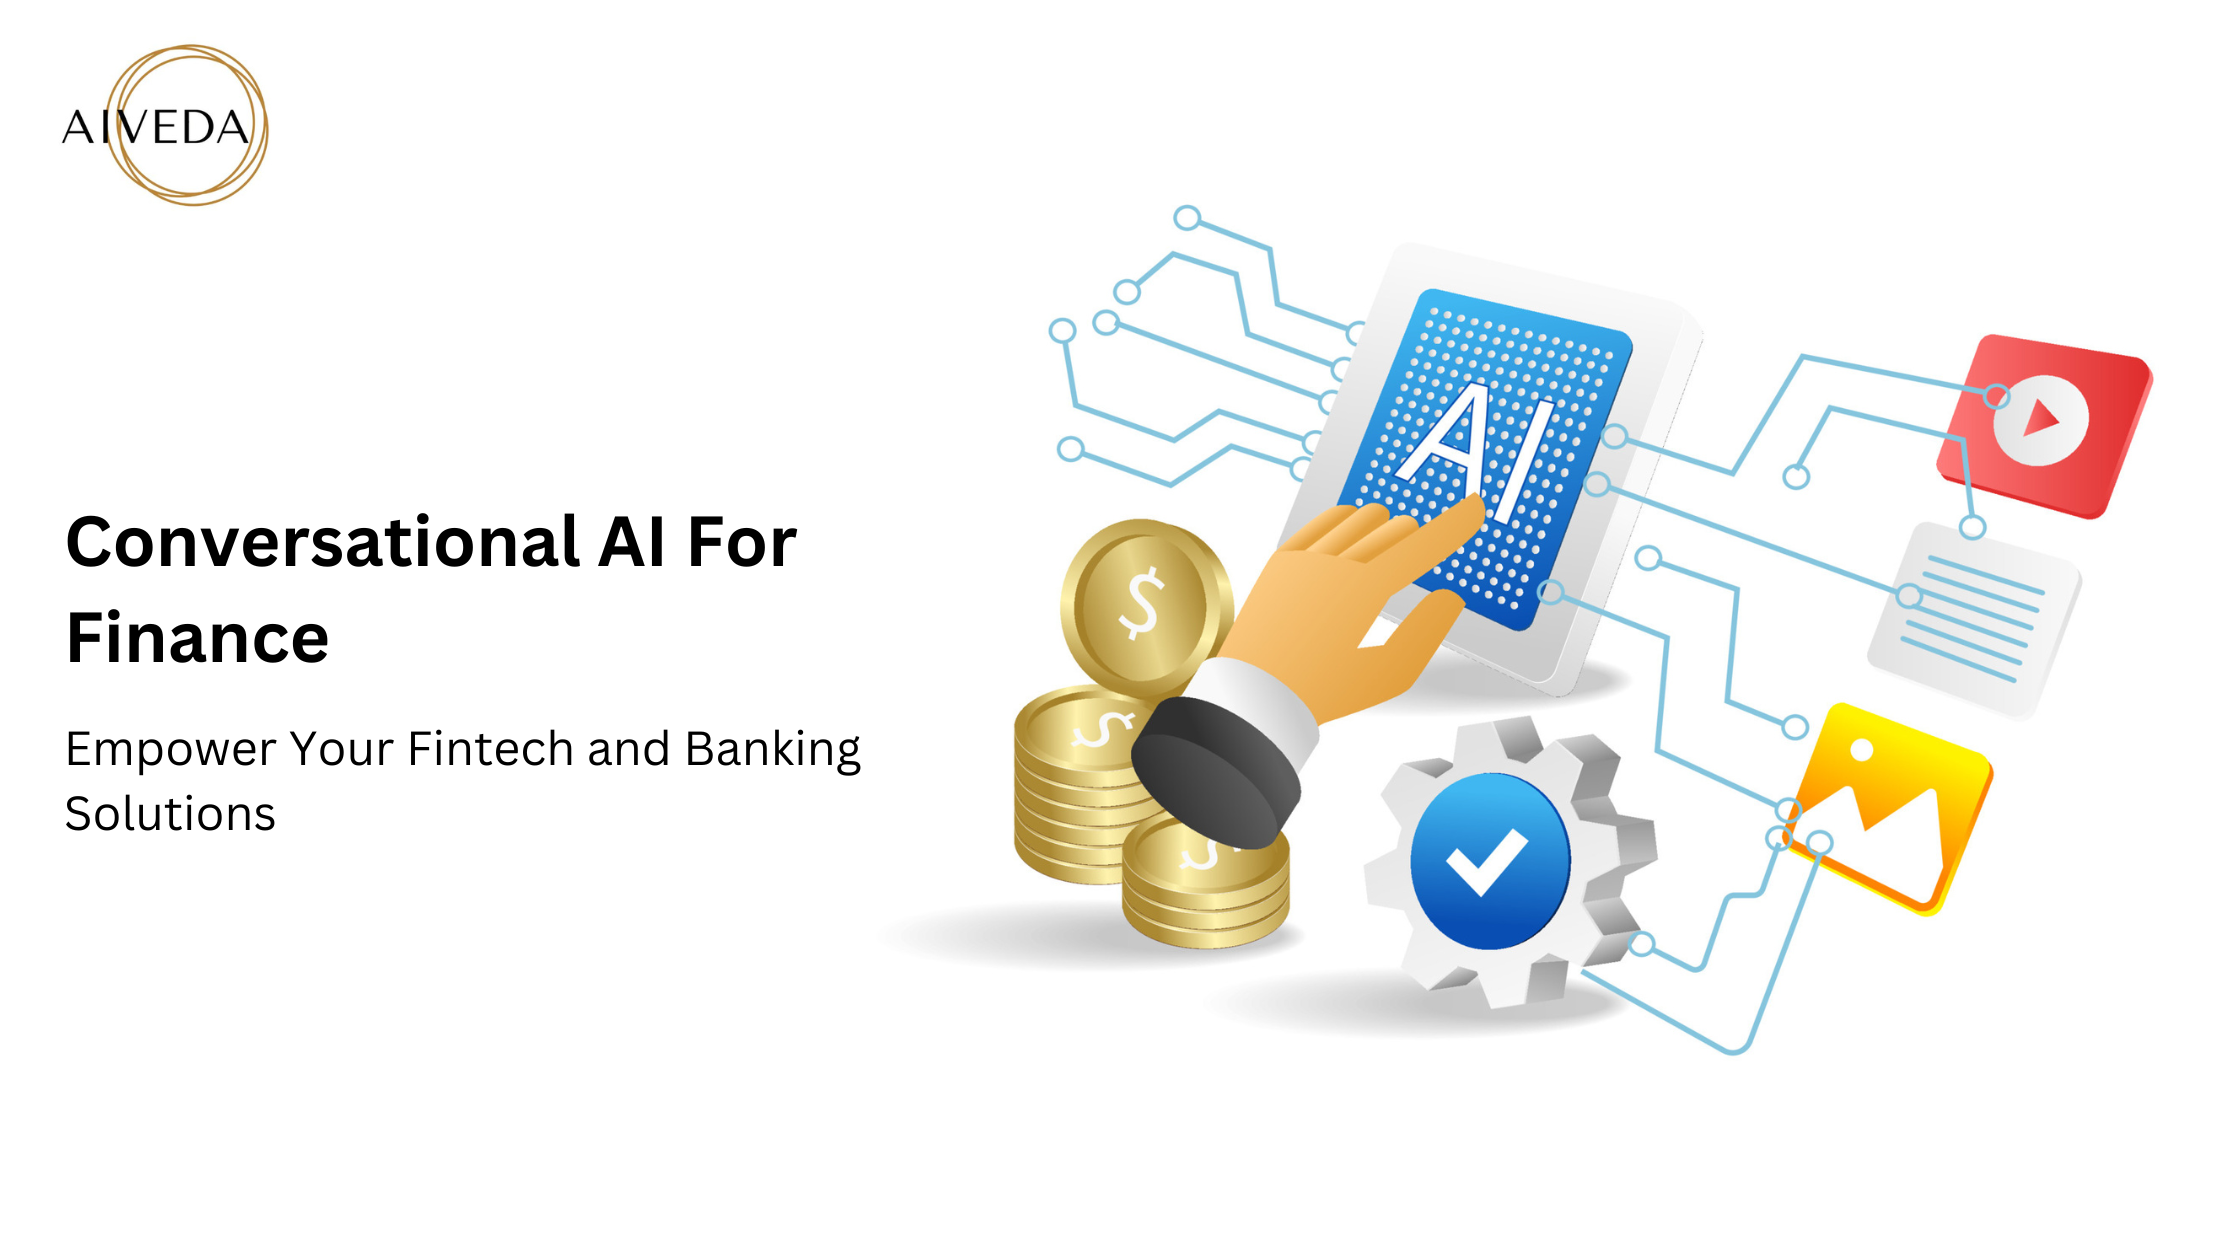 Conversational AI For Finance – Empower Your Fintech and Banking Solutions